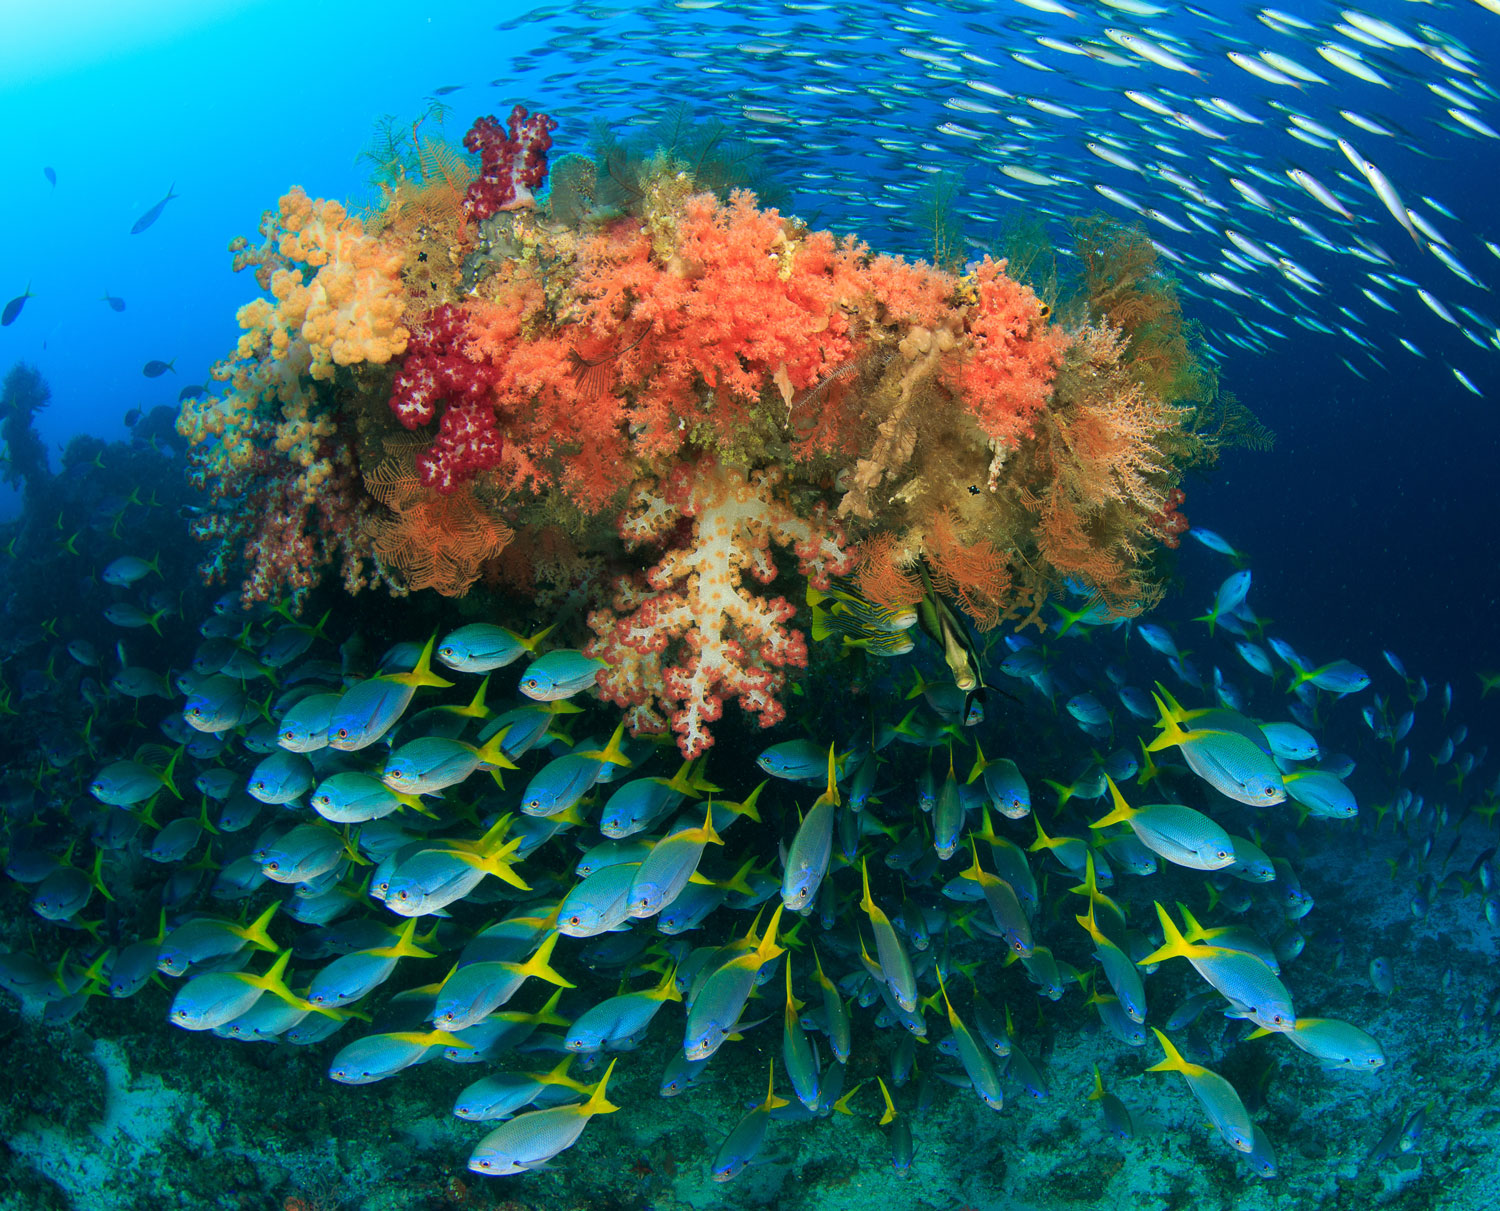 A school of small blue and yellow fish swim around brightly-coloured coral